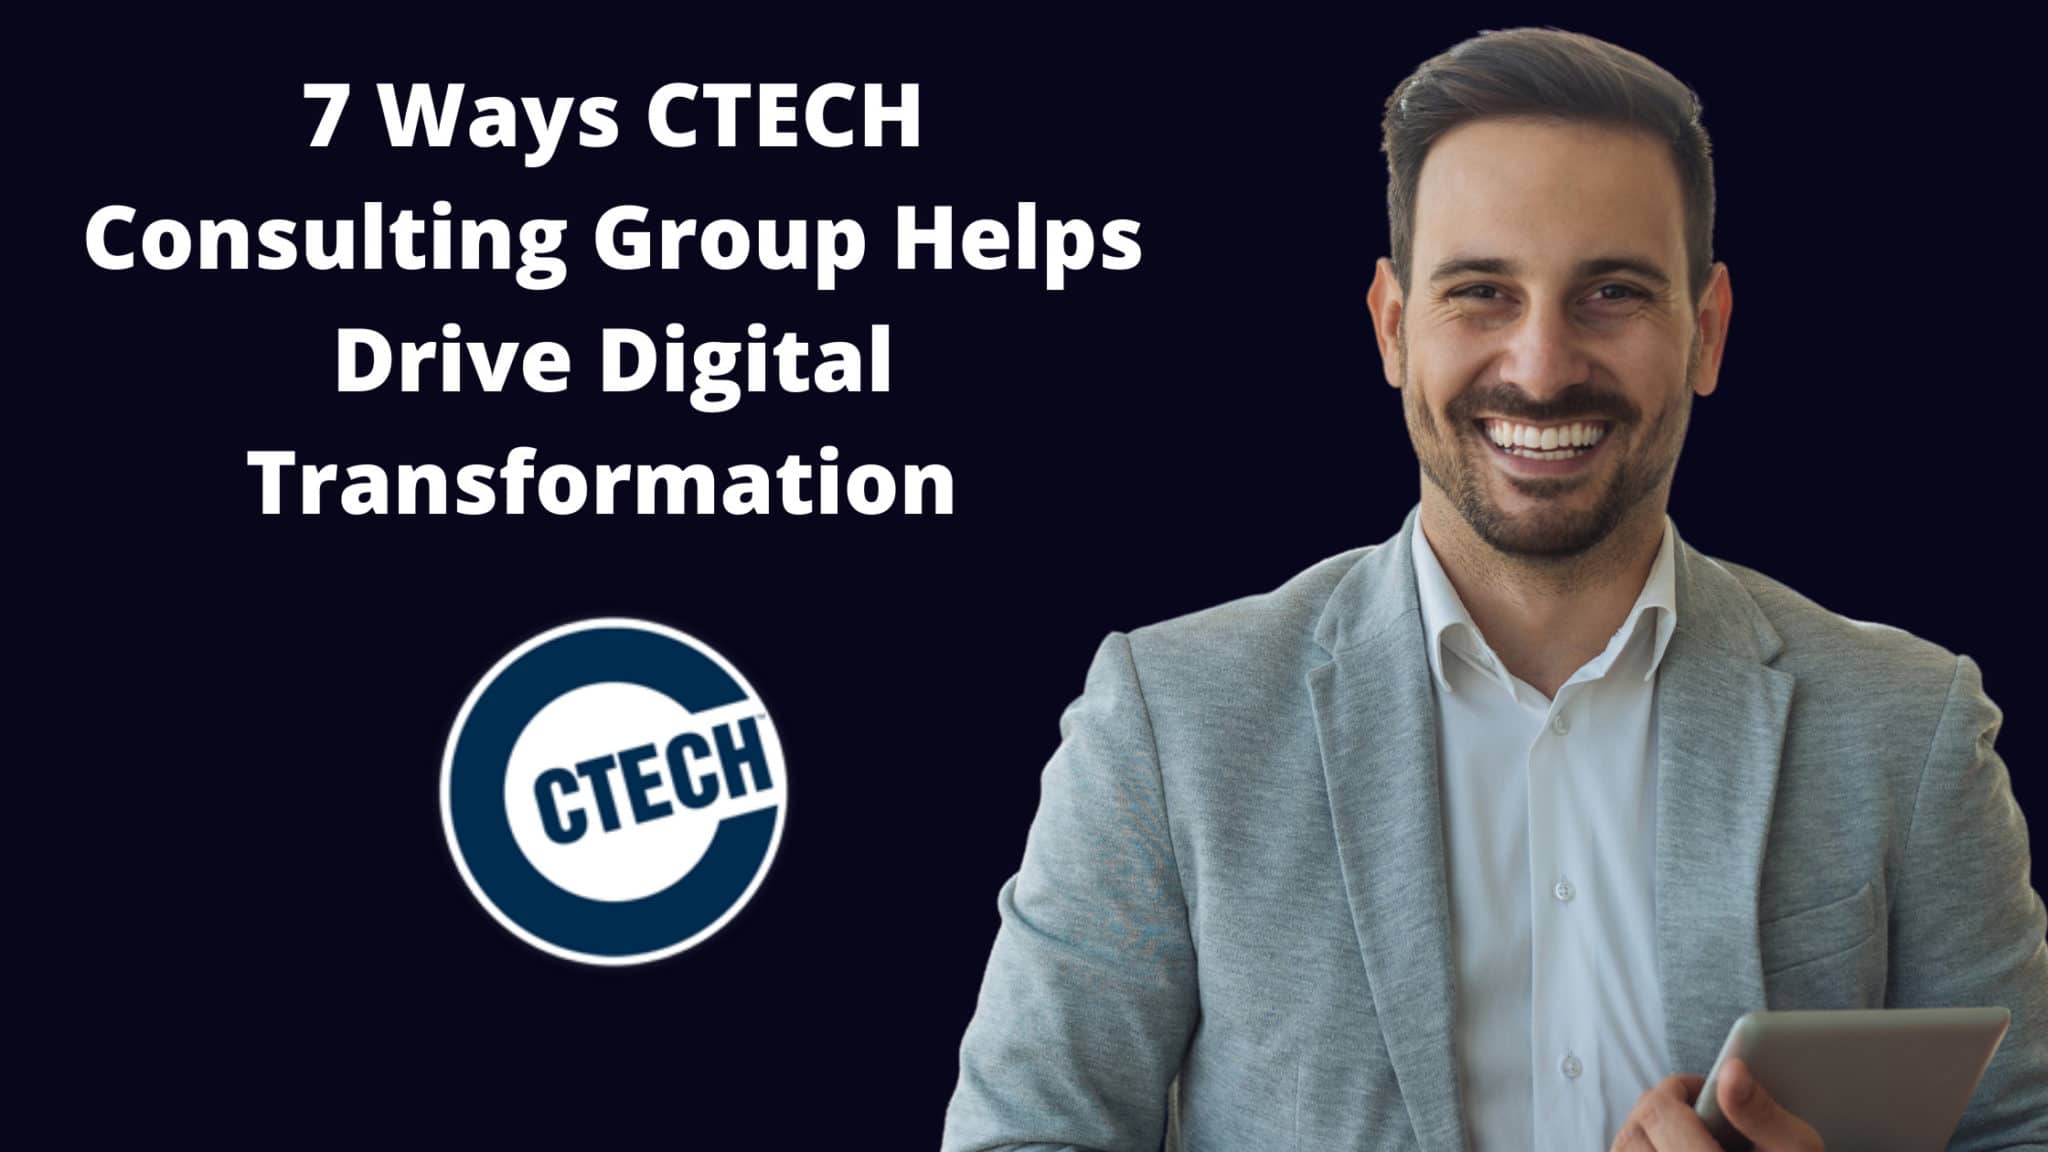 7 Ways CTECH Consulting Group Helps Drive Digital Transformation 